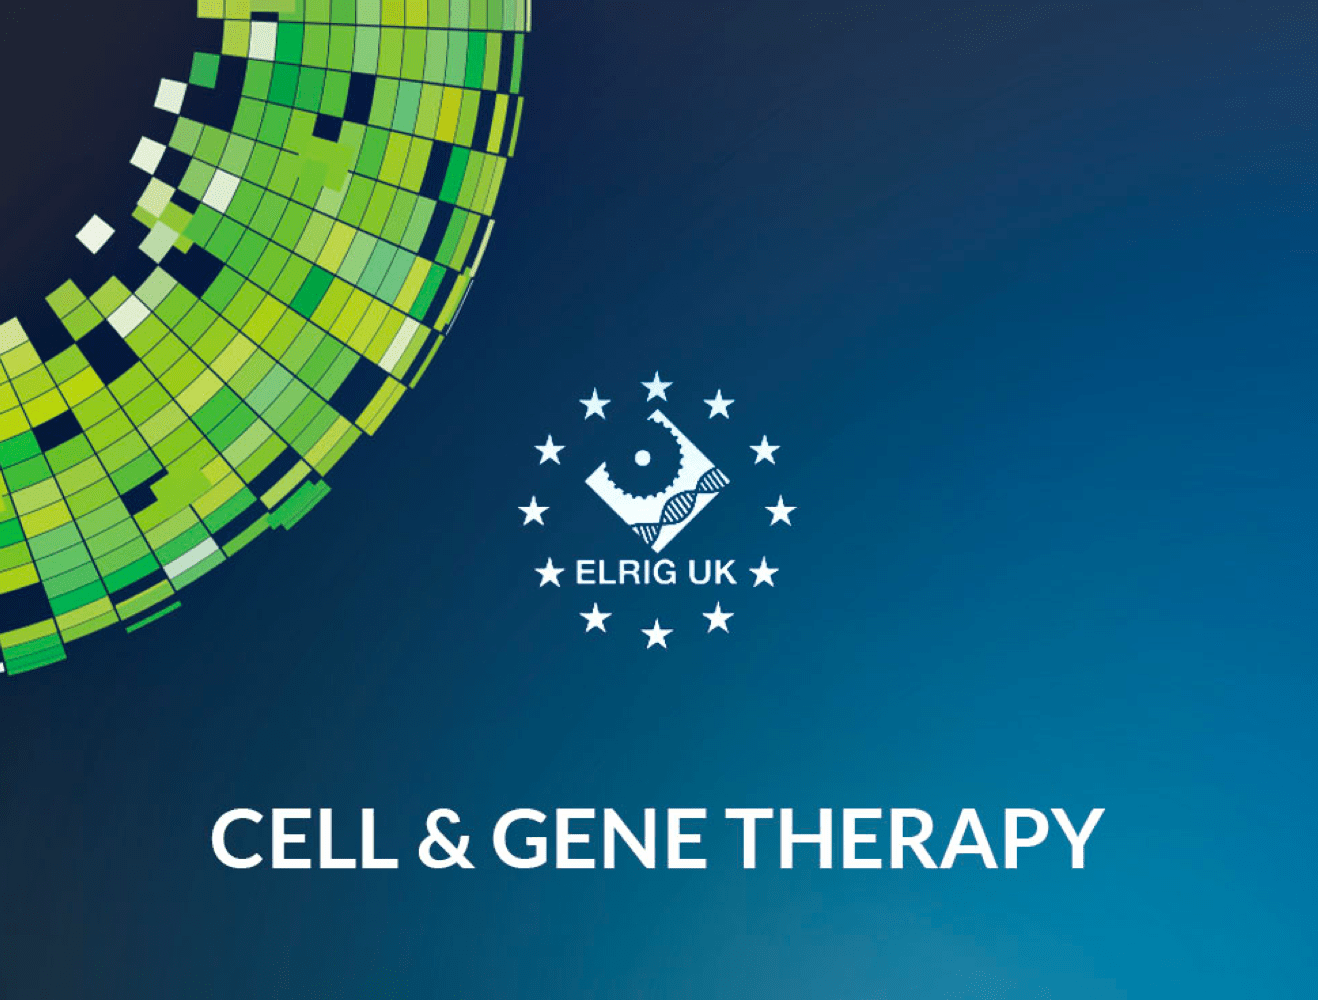 Cellular reprogramming to enable the precise and scalable manufacturing of human cells for therapeutic applications